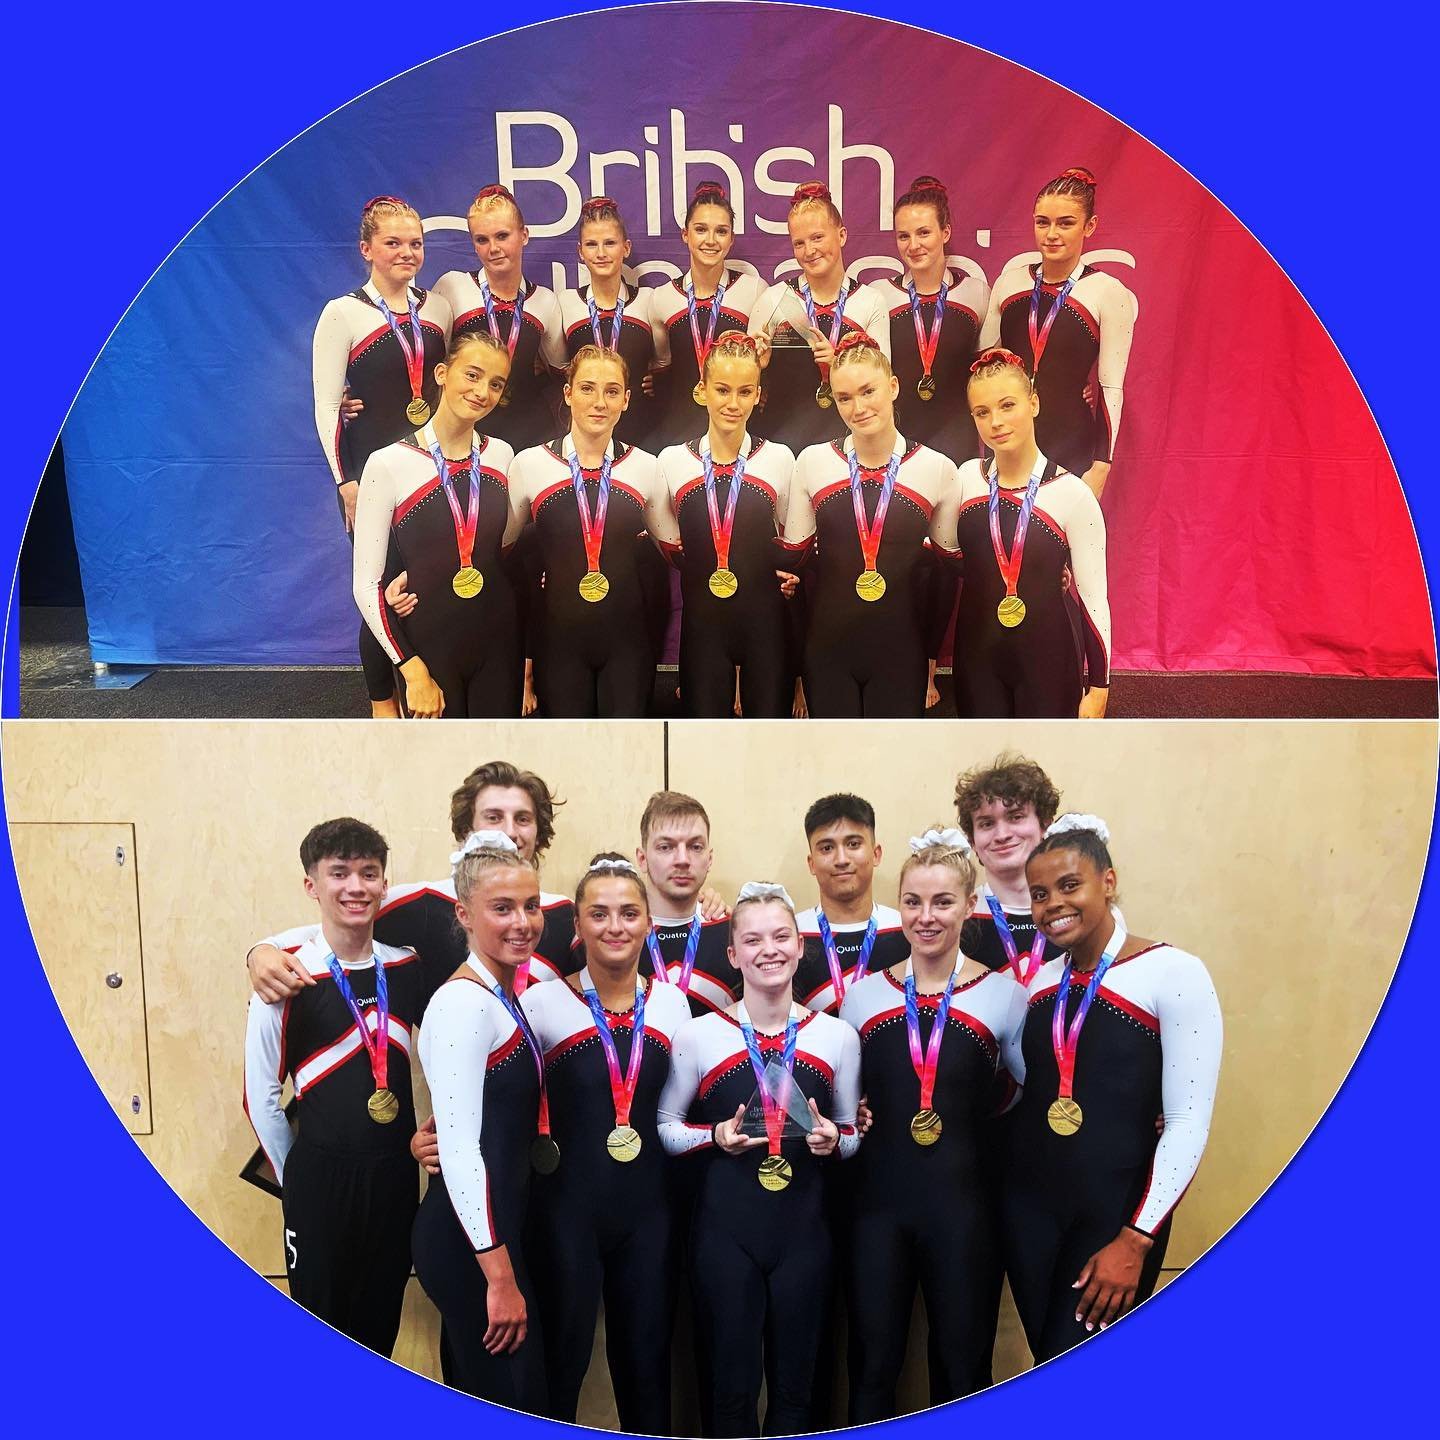 Congratulations to the Senior and Junior Black Teams on being selected to represent GBR 🇬🇧 at the Mid European TeamGym Championships in Italy 🇮🇹 this November 👏👏👏

@britishgymnasticsofficial @teamgym.mech @everyoneactive_bracknell @bracknellfo